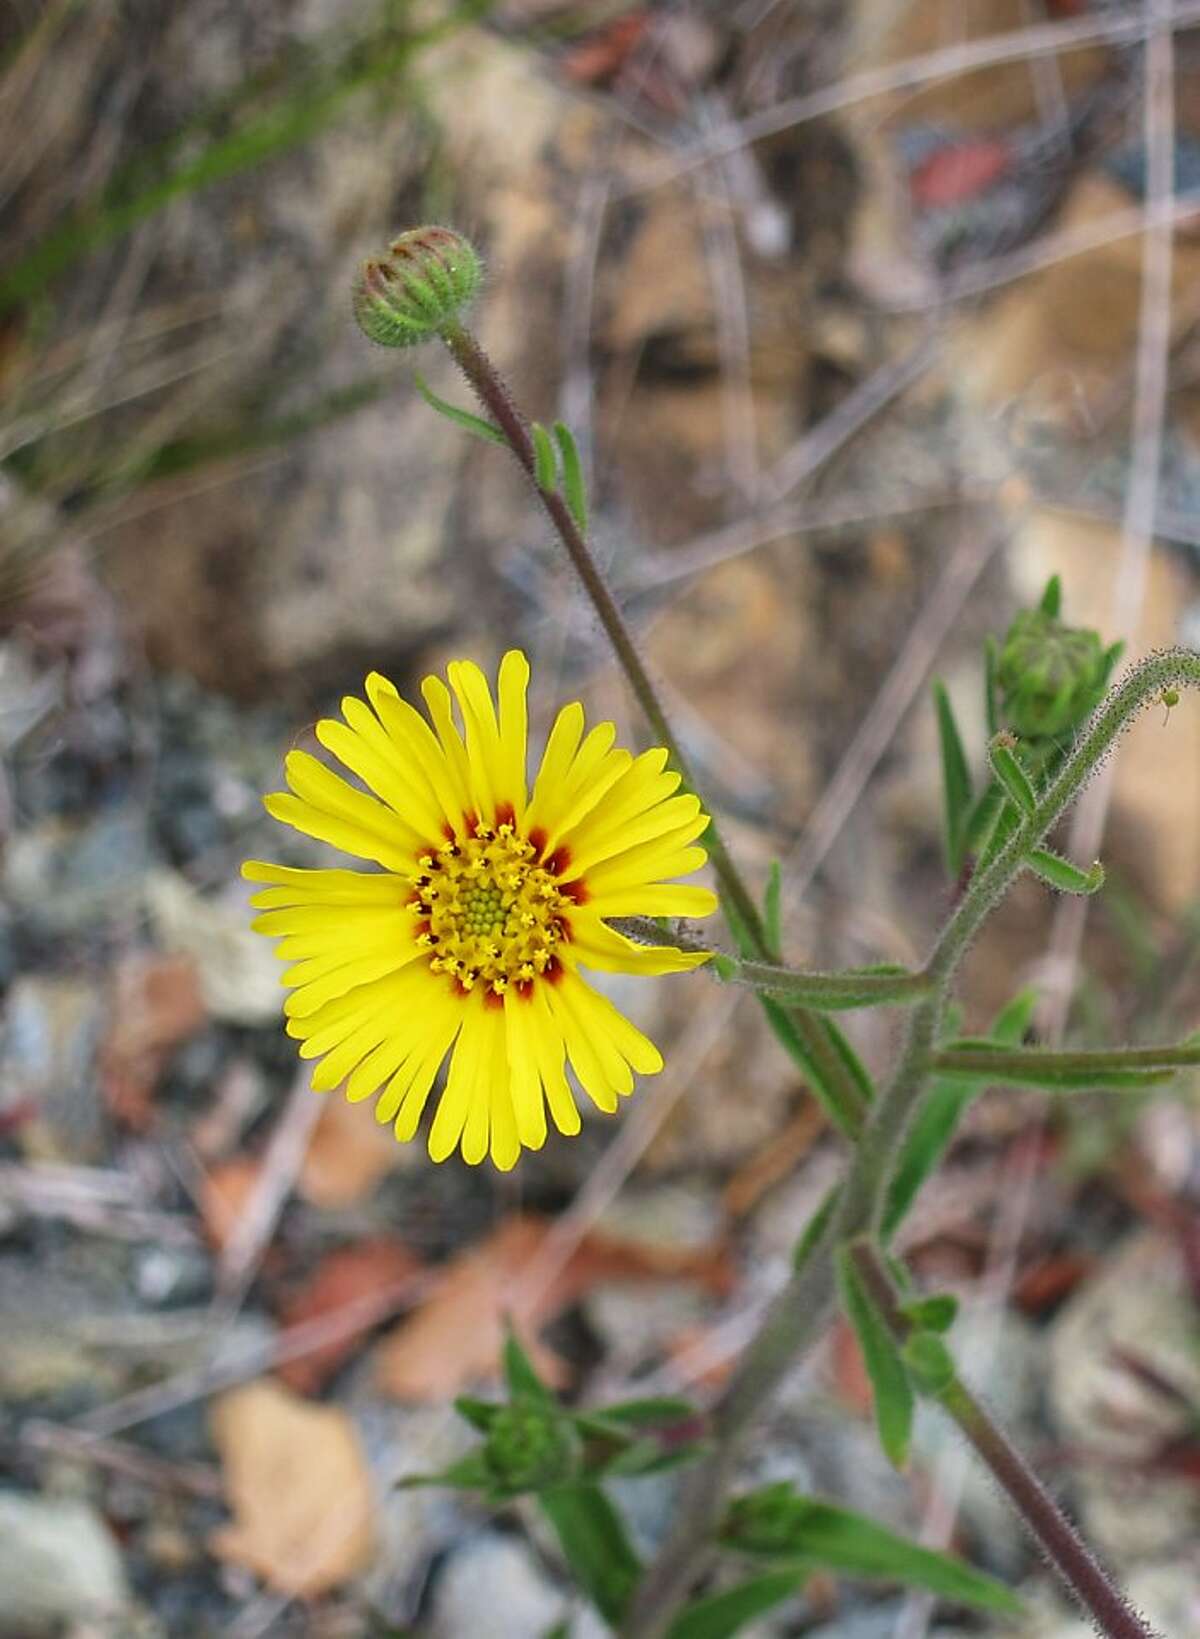 A late summer California native meadow flower, Madia elegans flowers may be all yellow or may have dark red dots, such as you see in this example.